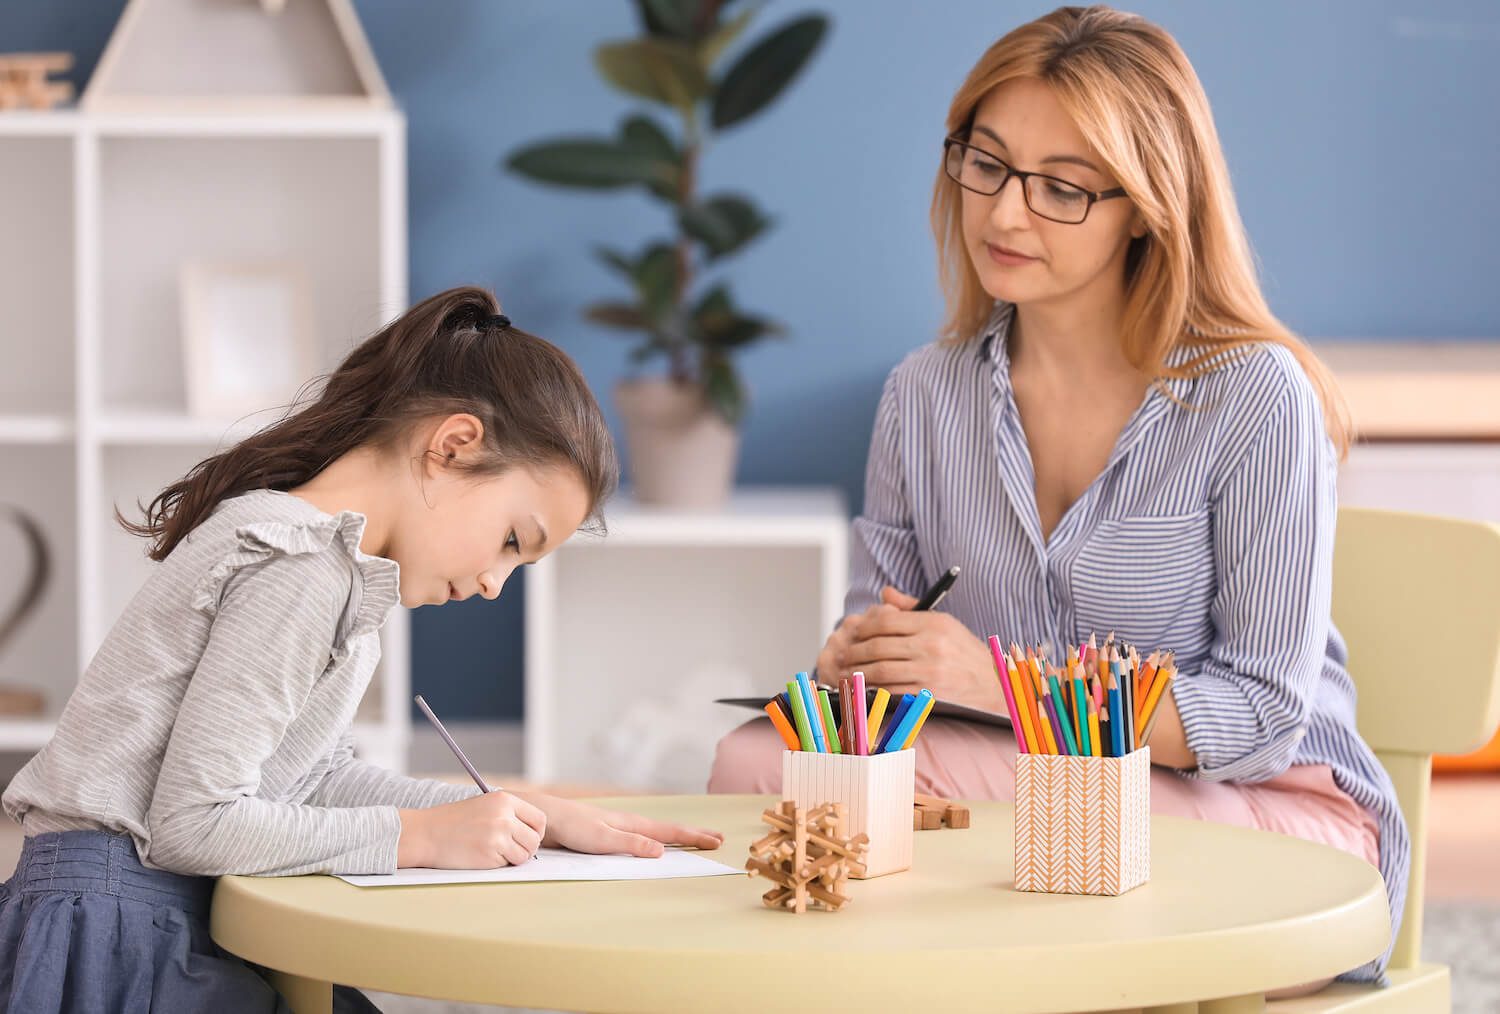 What Is a Child Psychological Assessment And What Are The Benefits?